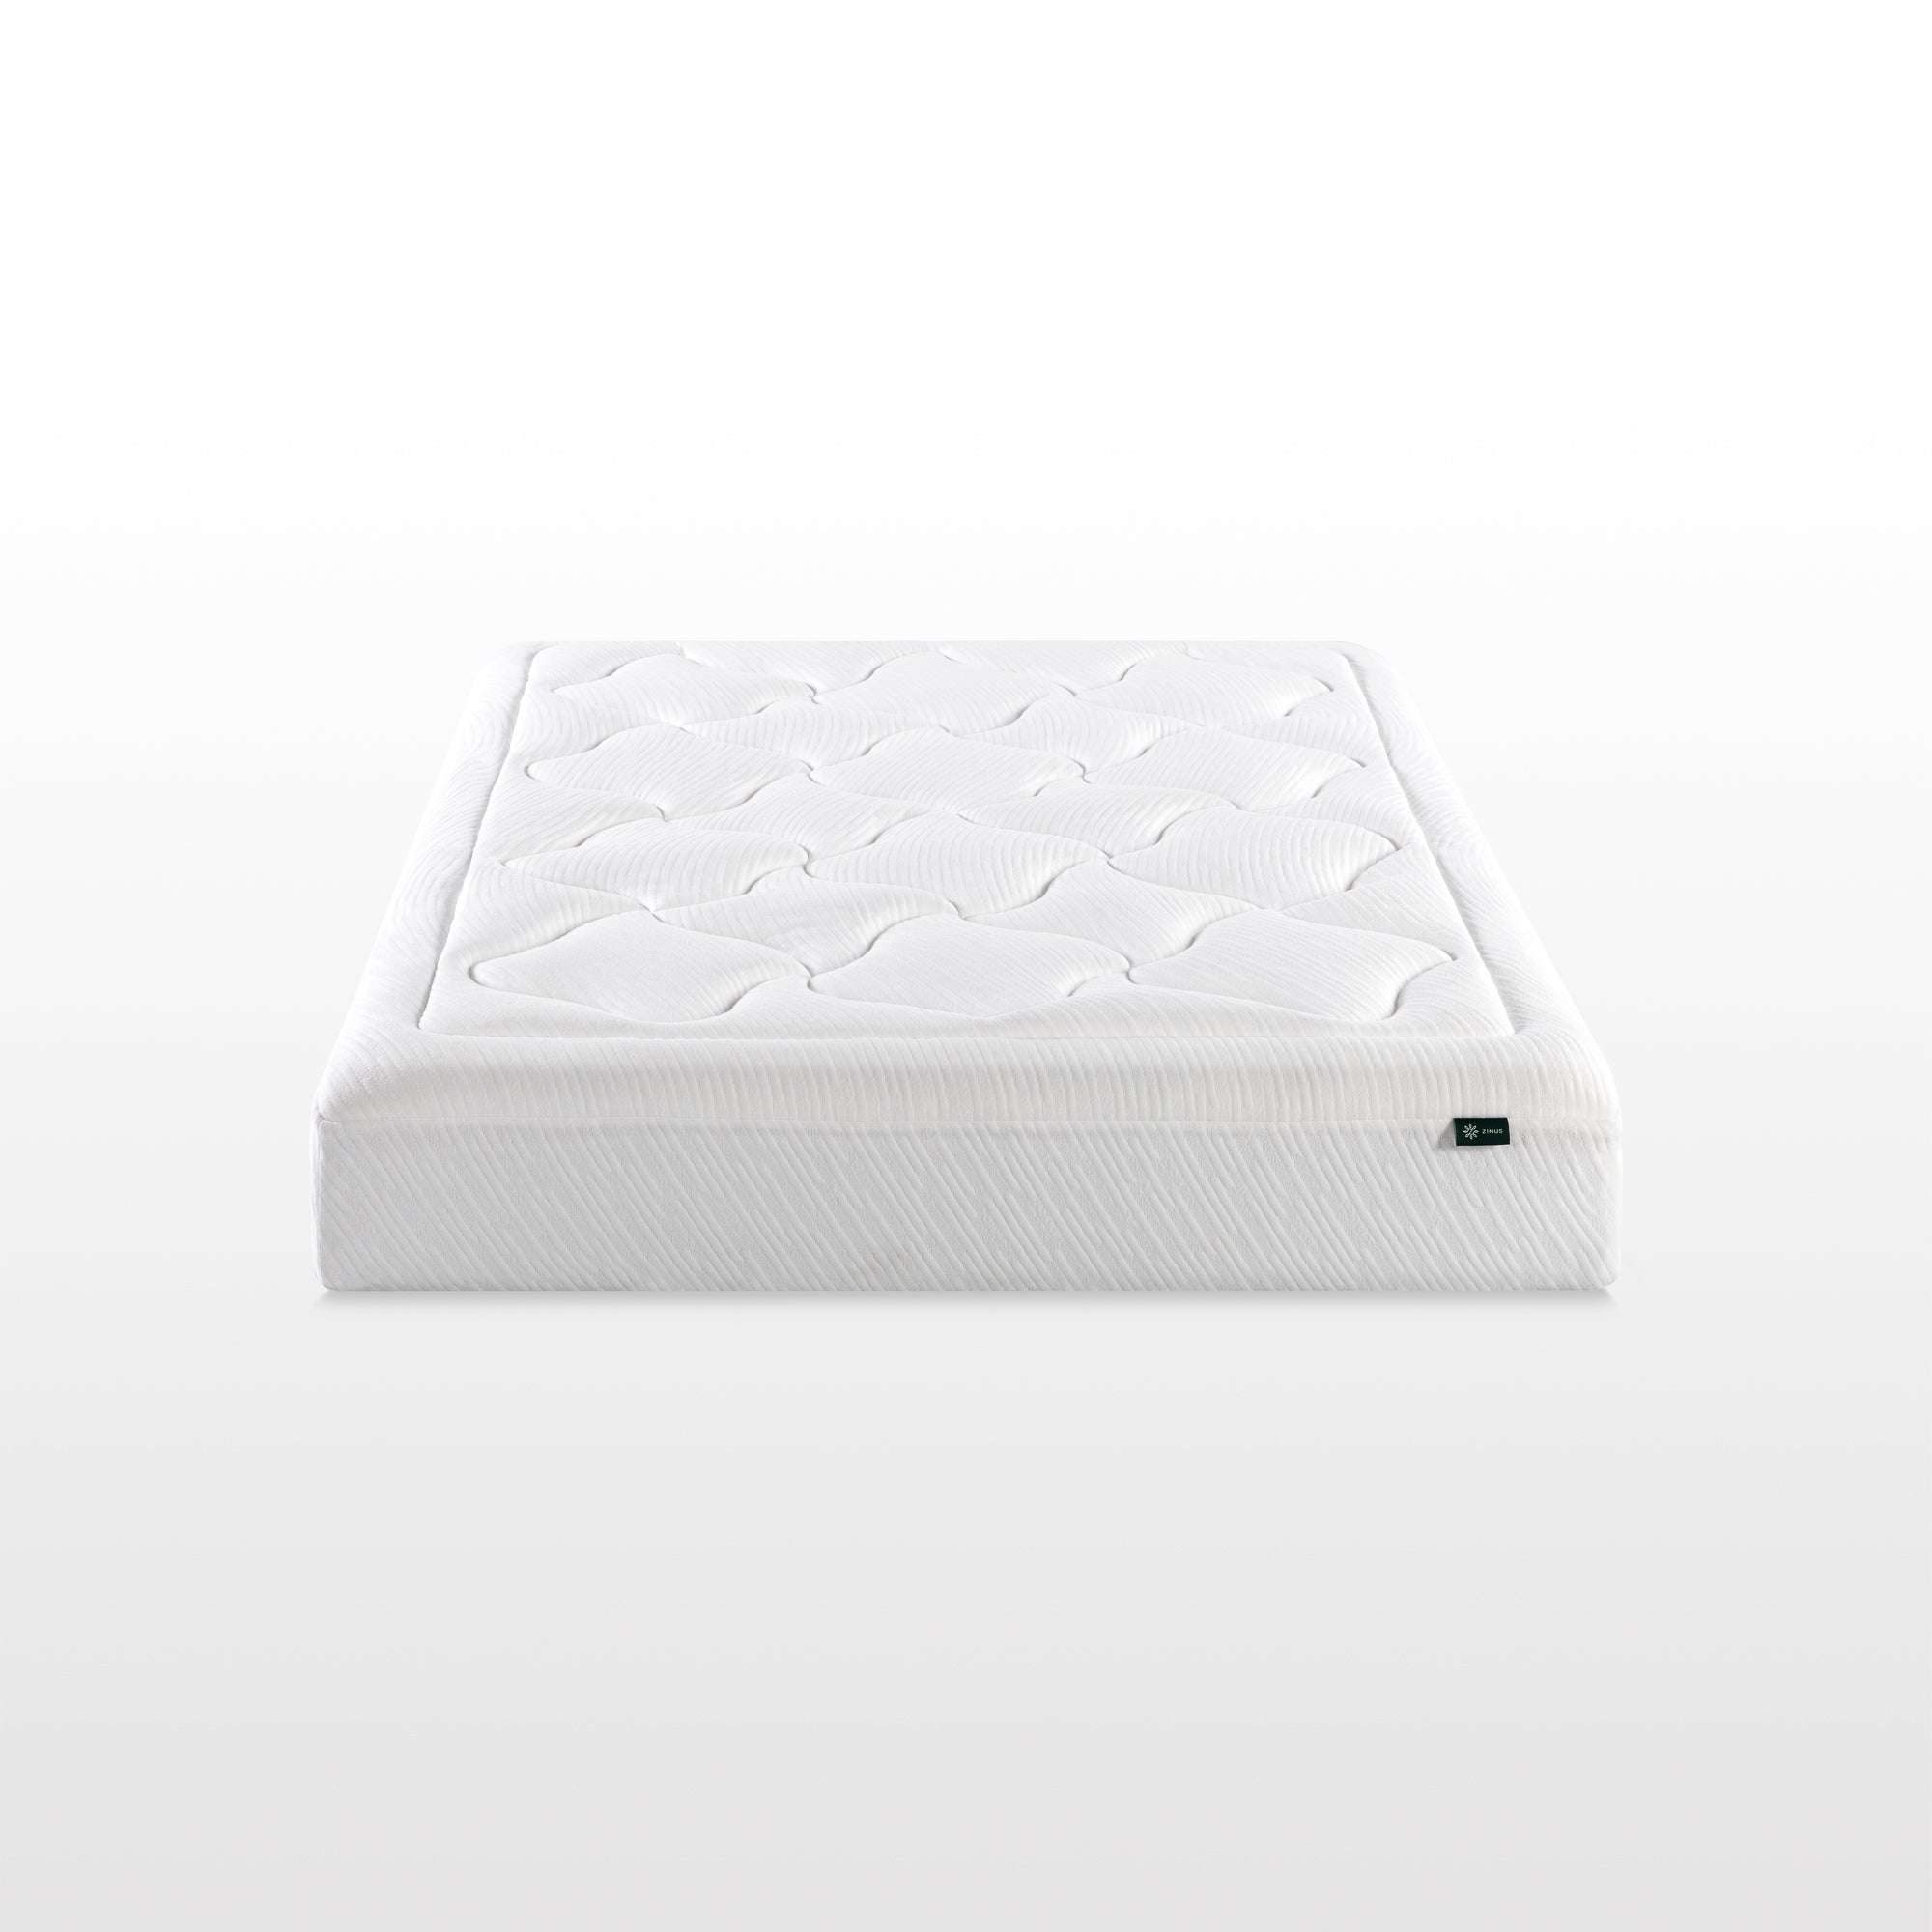 10 Inches Air Foam Pressure Relief Bed Mattress with Removable Soft Cover-Queen Size - Color: White - Size: Queen Size